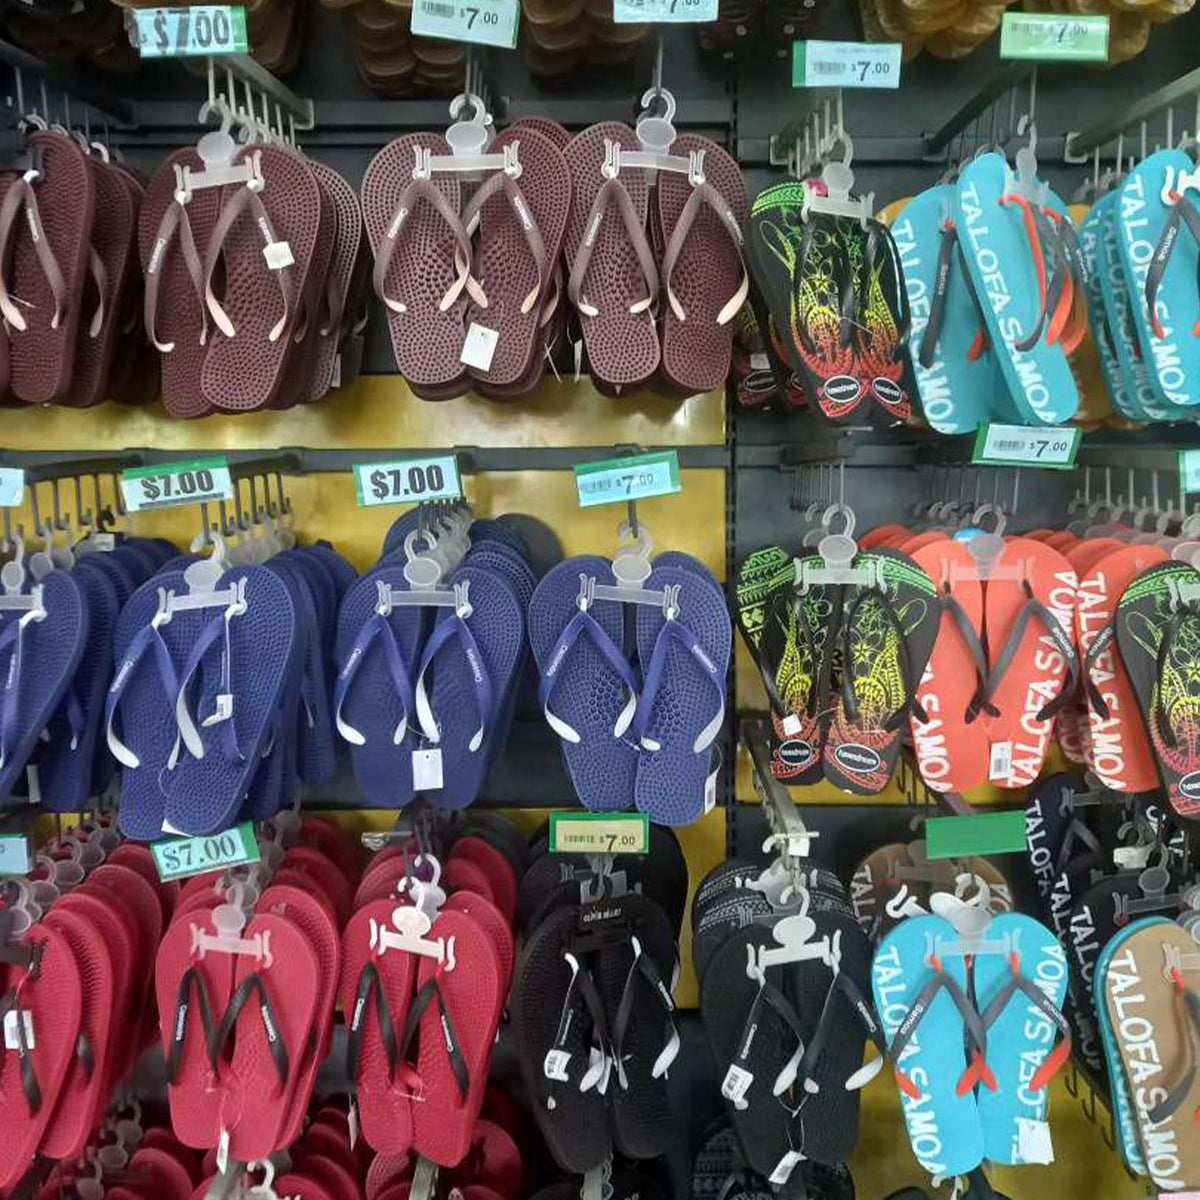 Jandals $7.00 [Sizes By Choice]